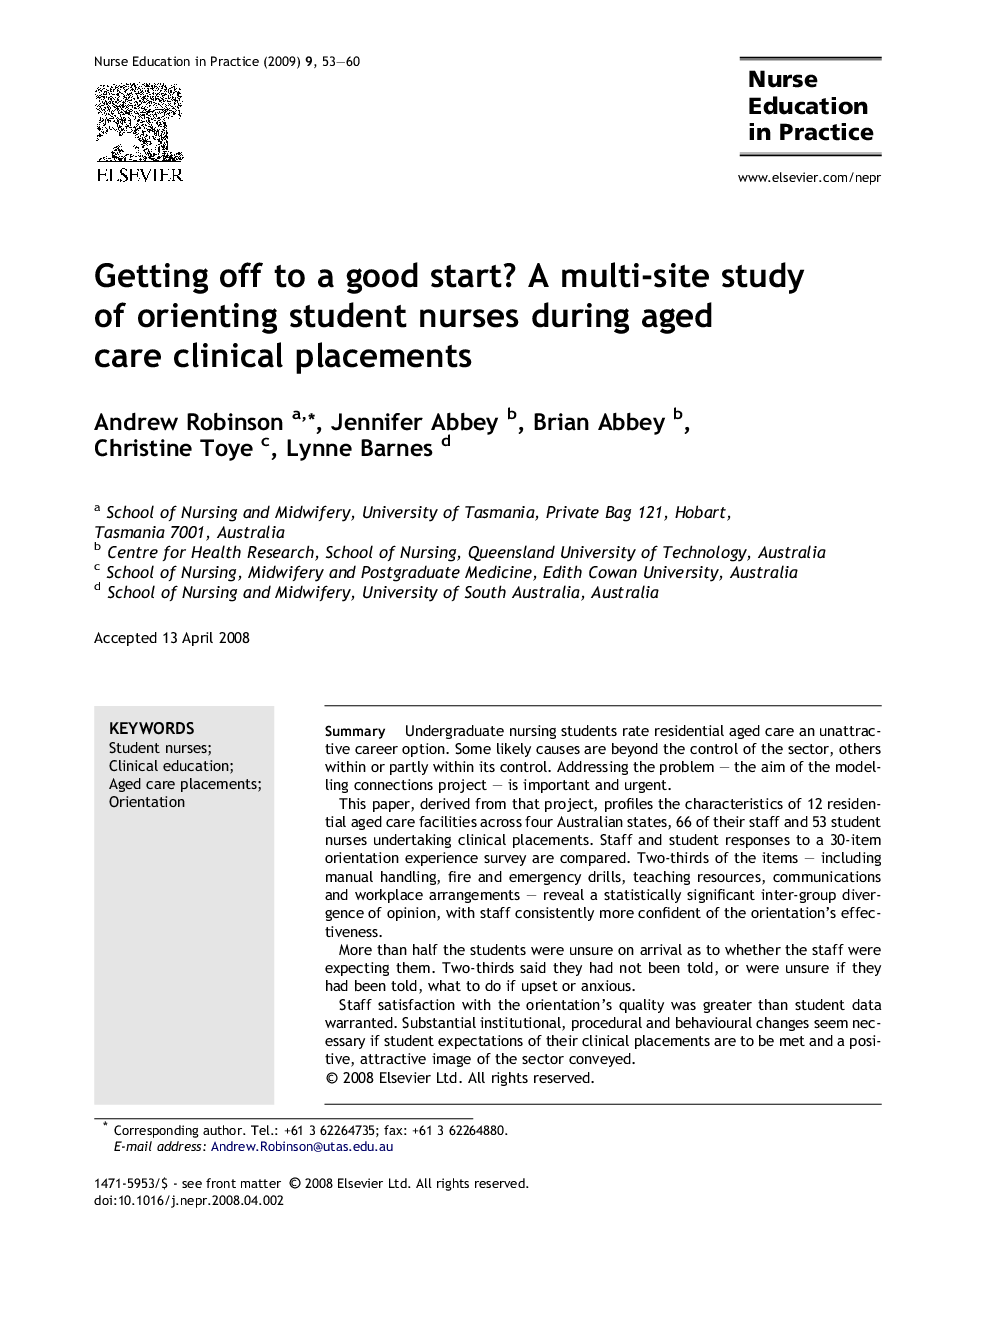 Getting off to a good start? A multi-site study of orienting student nurses during aged care clinical placements